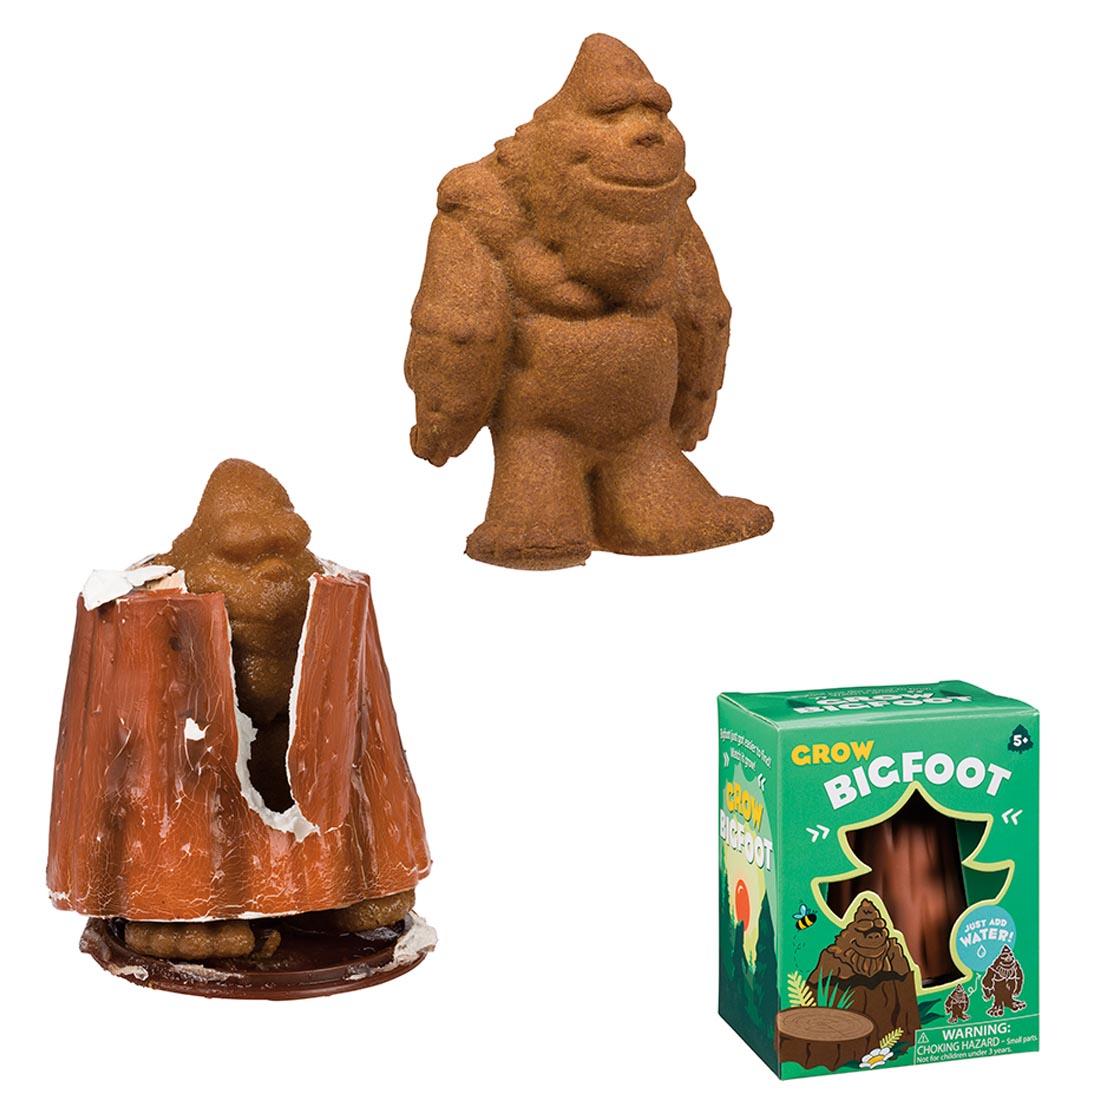 Hatchin' Grow Bigfoot By Toysmith shown inside the package, half-way grown, and fully hatched